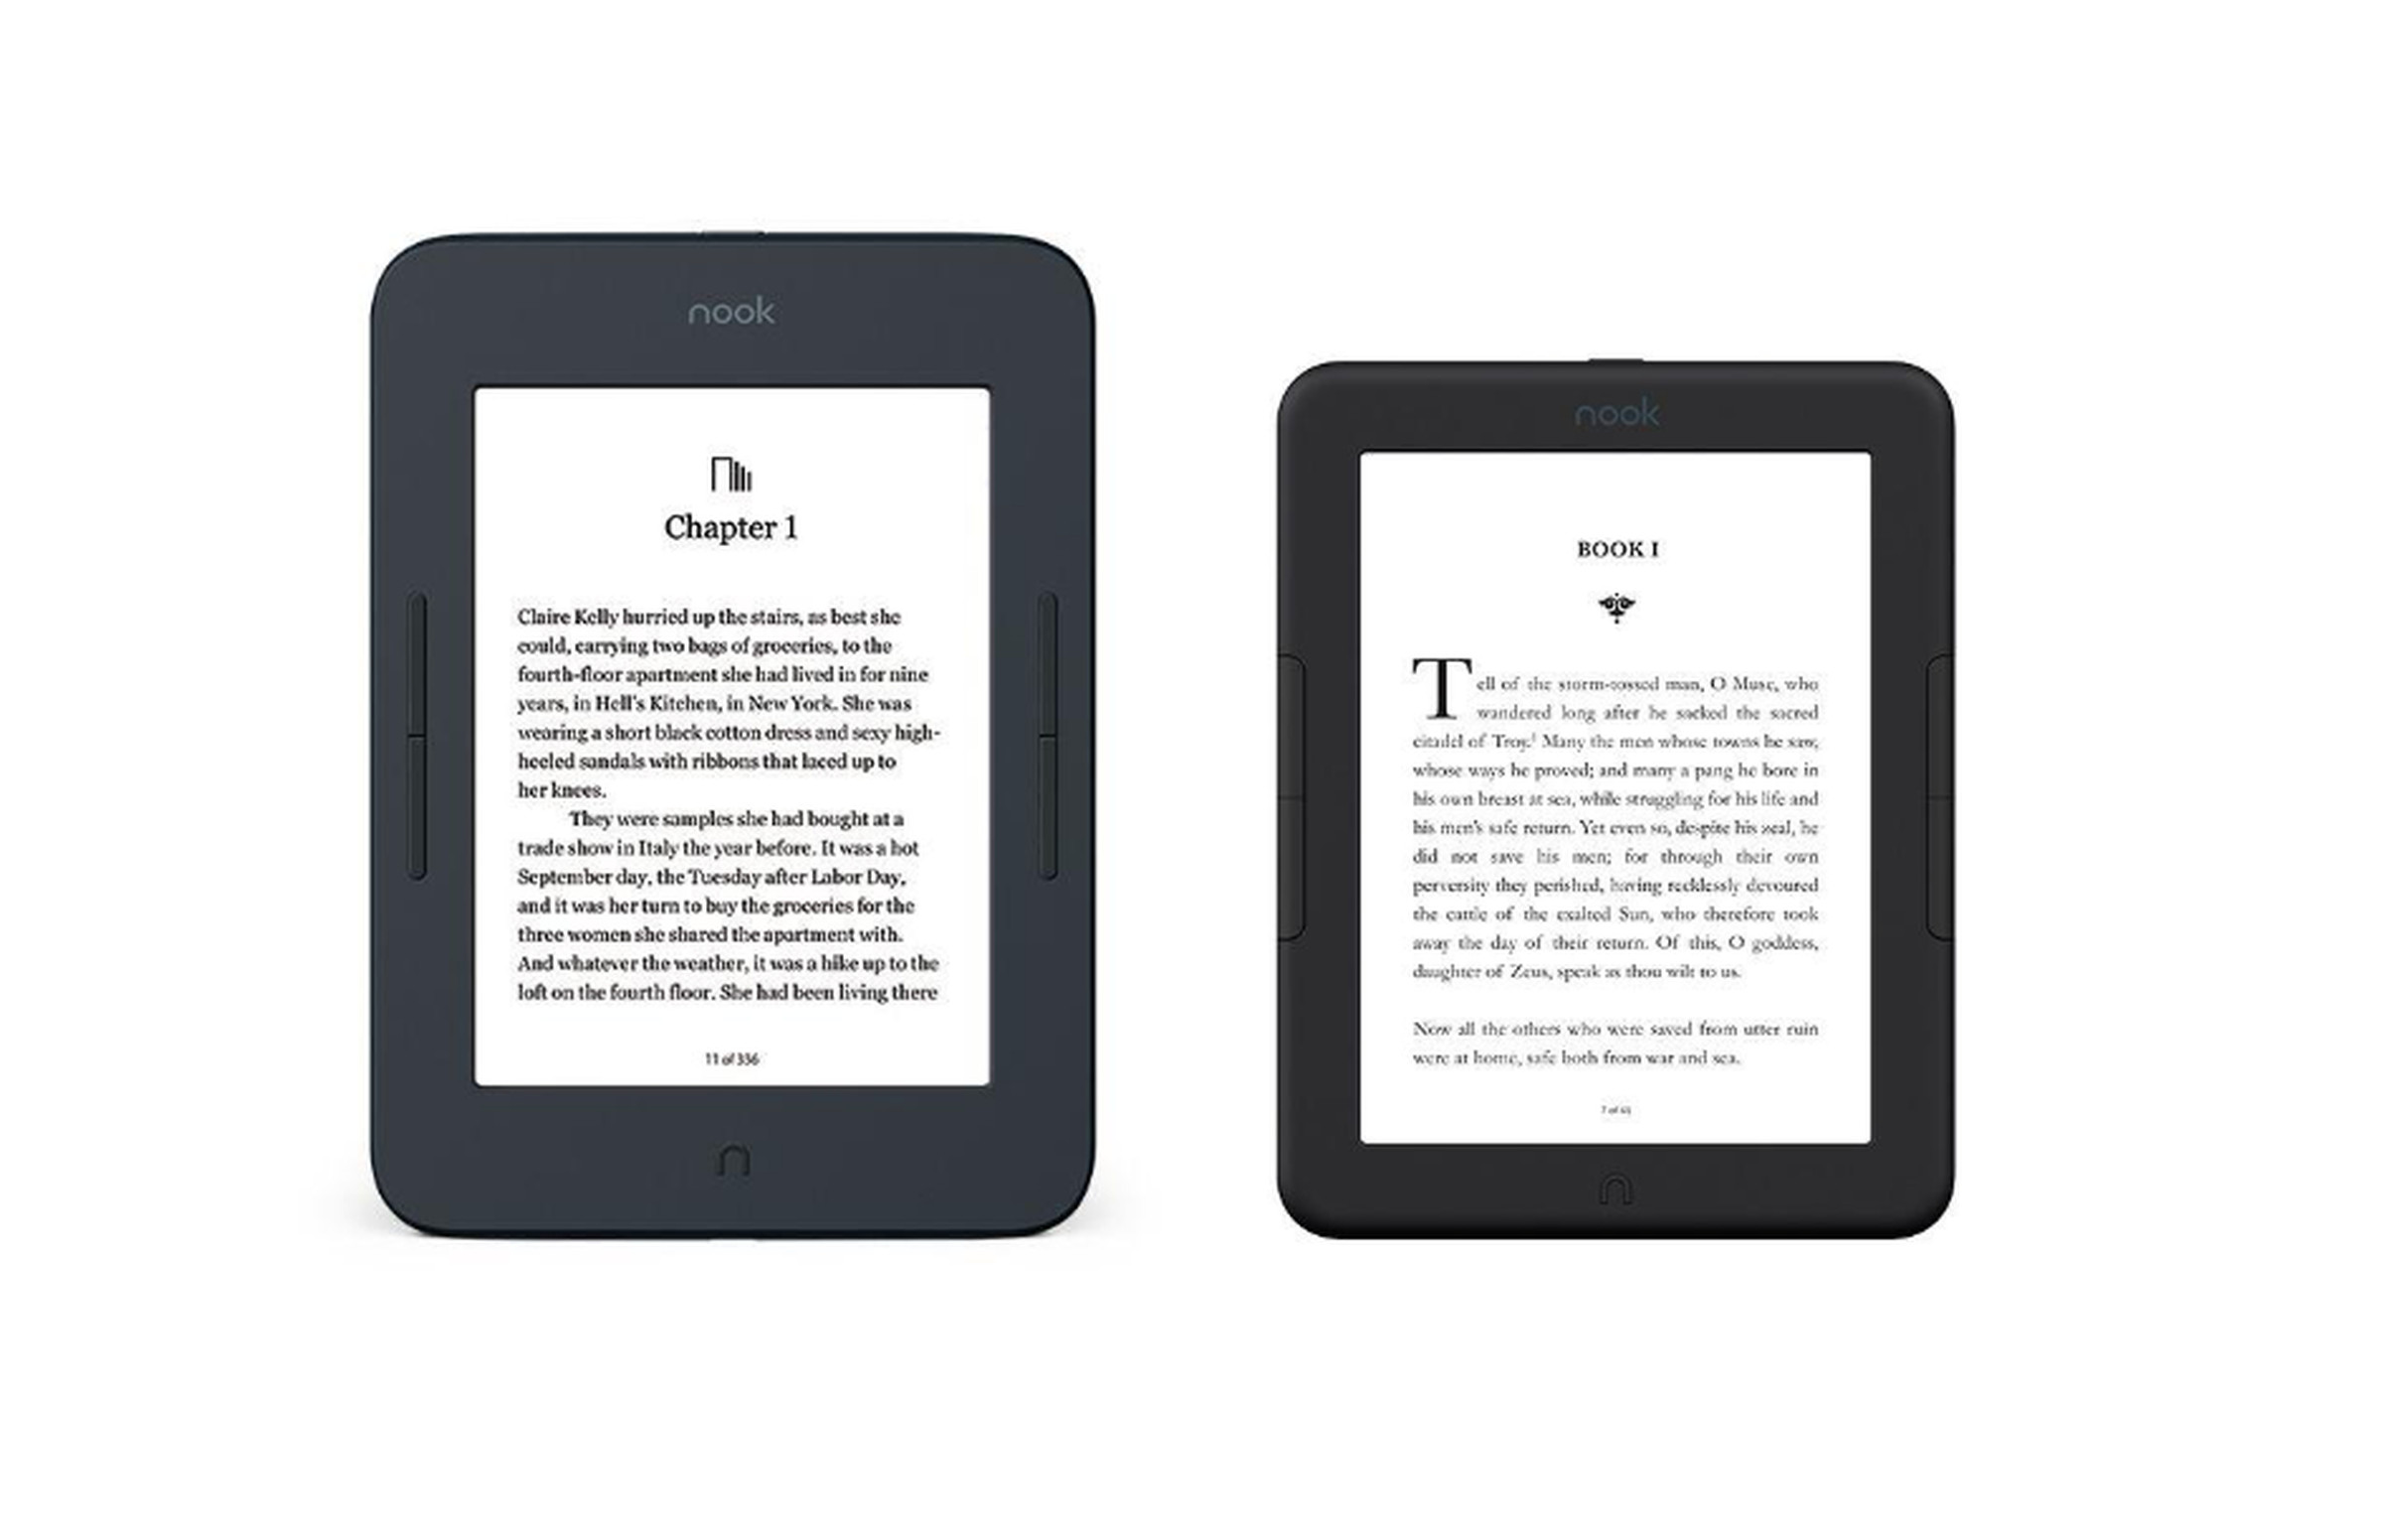 The Nook GlowLight 3 (left) and the new GlowLight 4 (right).